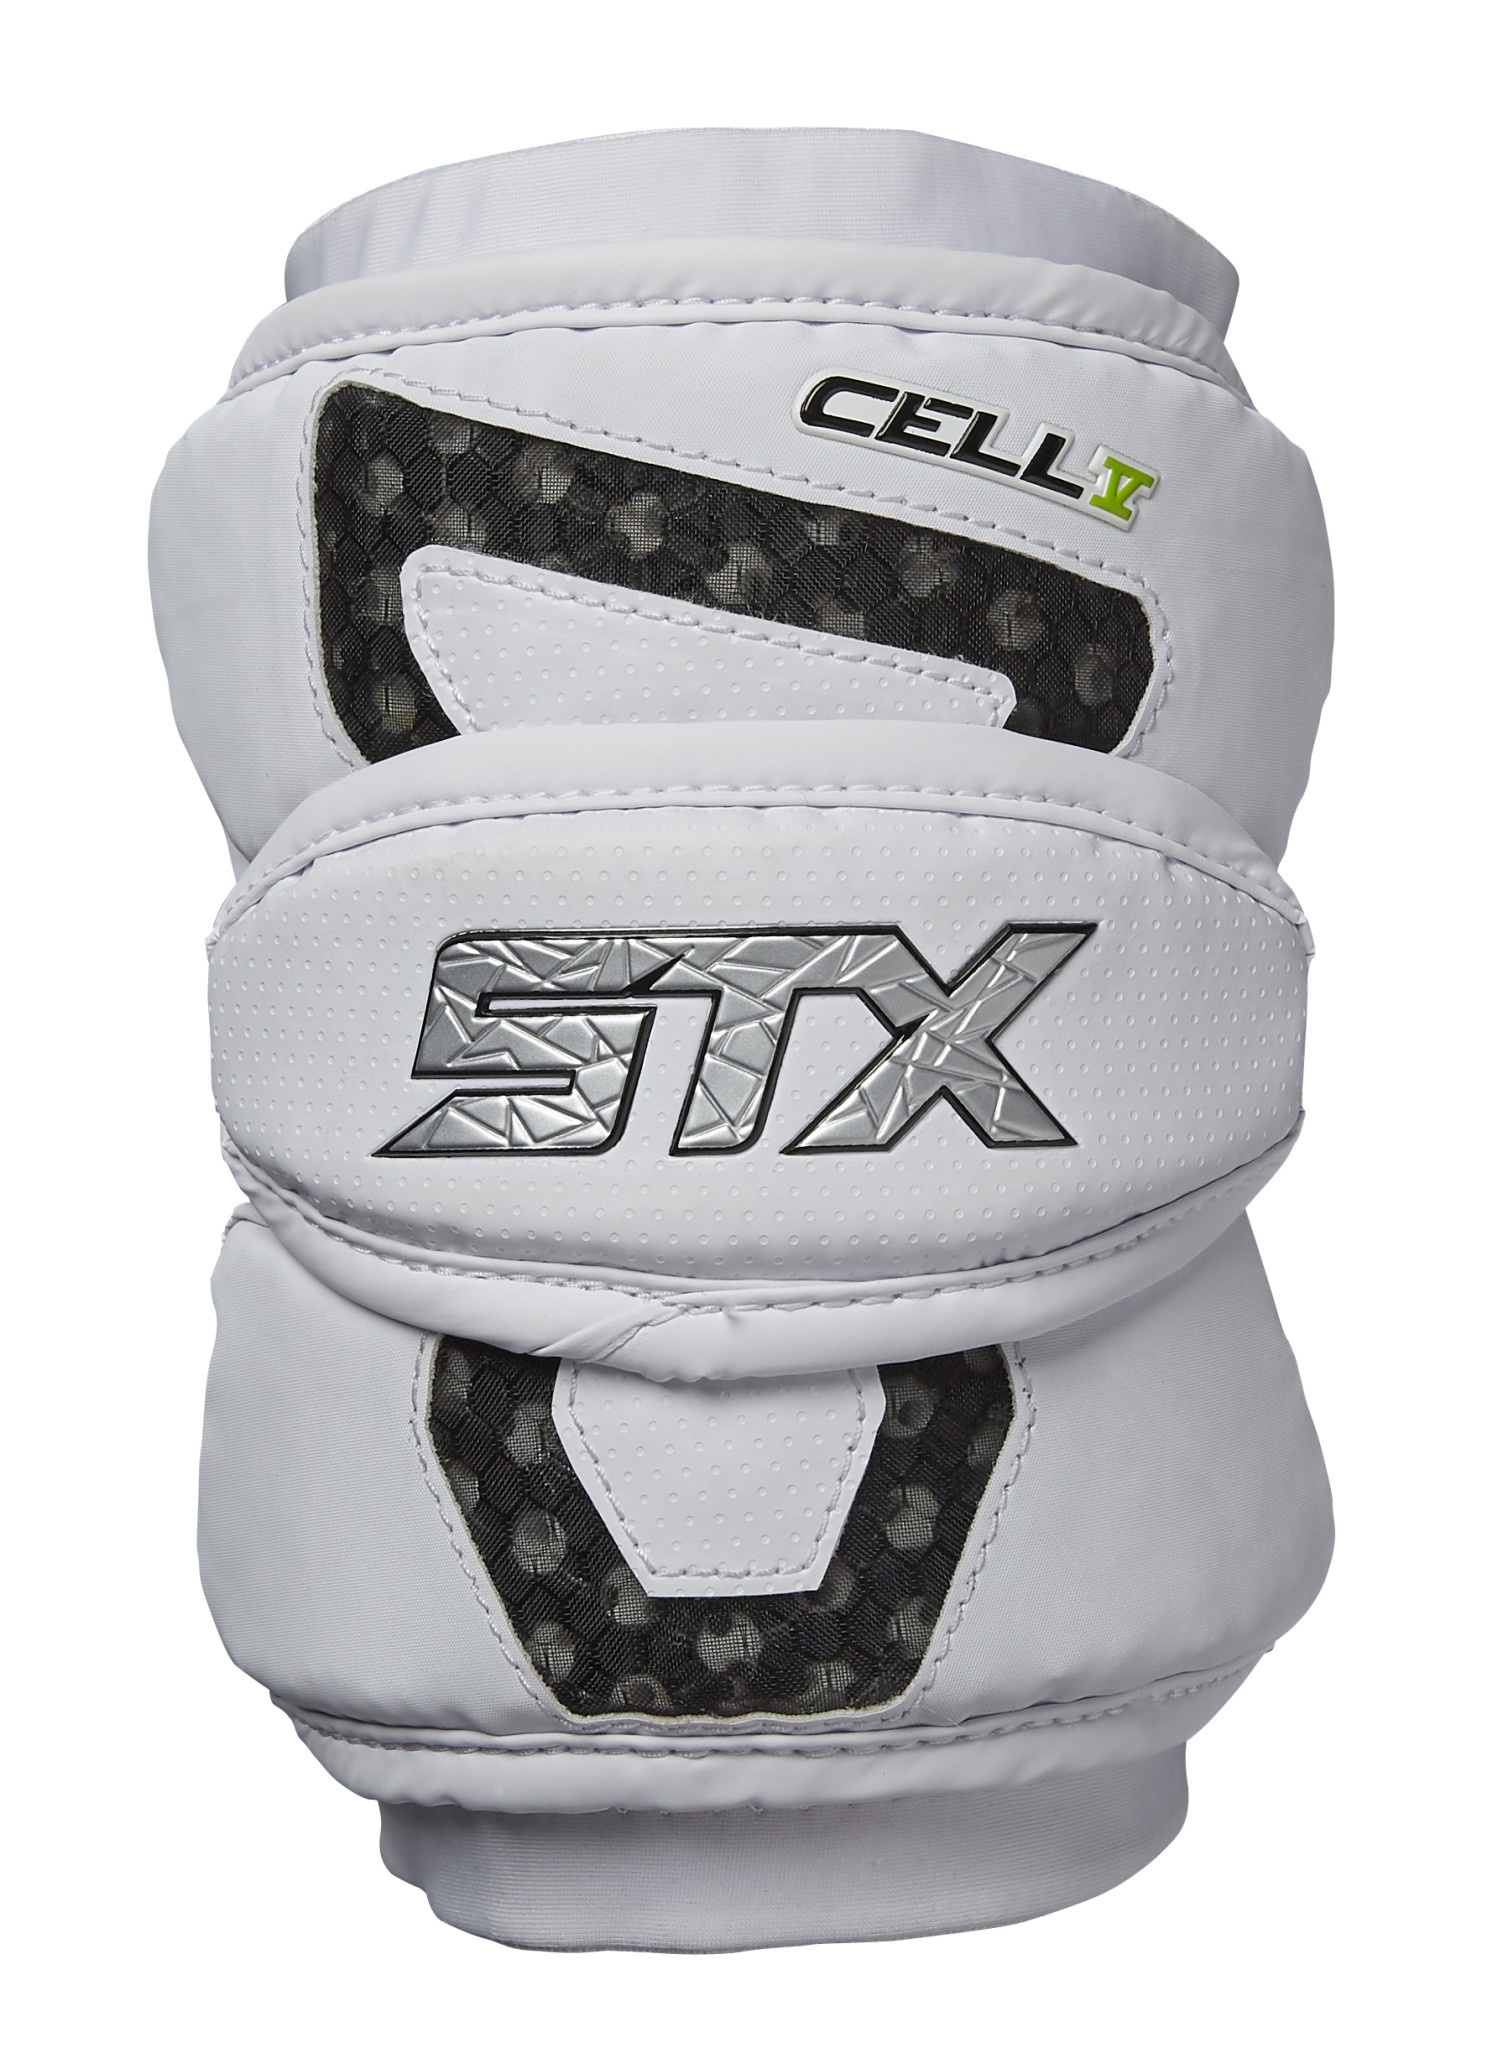 NEW STX lacrosse elbow Pads Cell 2 Size Small KIDS 